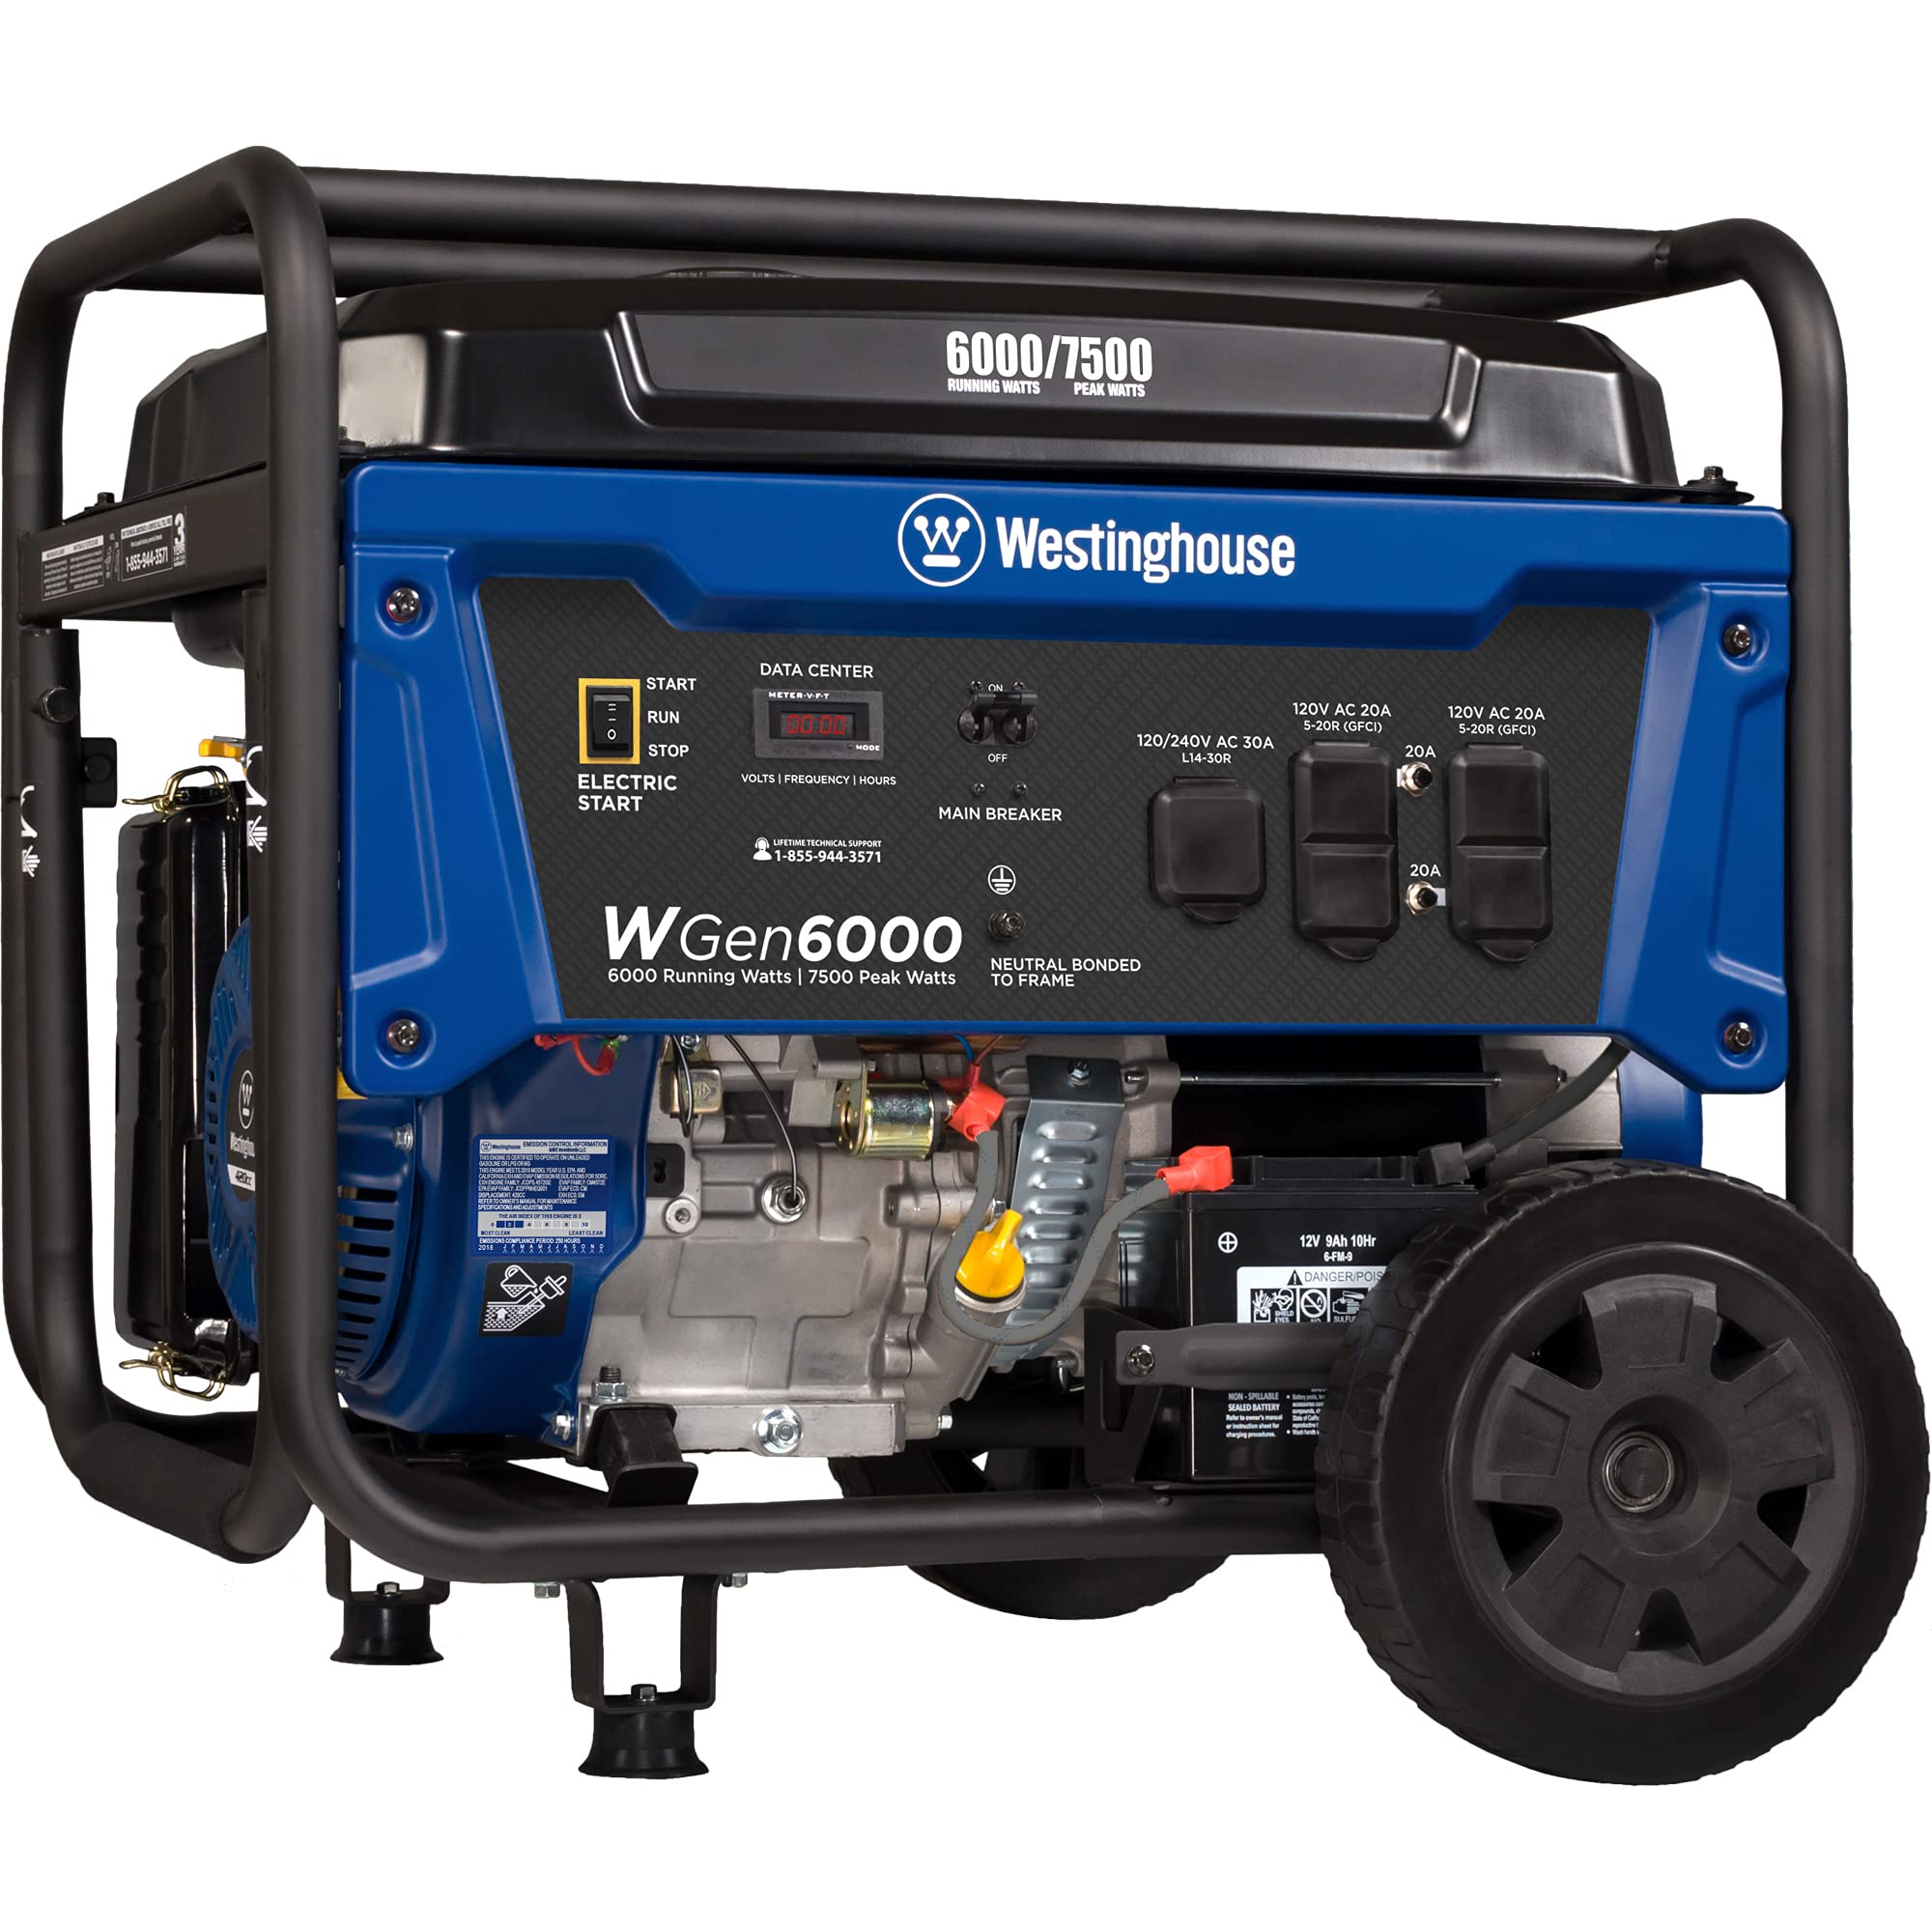 Gas Generator 7500/6000 watt Westinghouse 420 cc wgen6000 $586 after 20% off YMMV possibly targeted Amazon coupon -electric